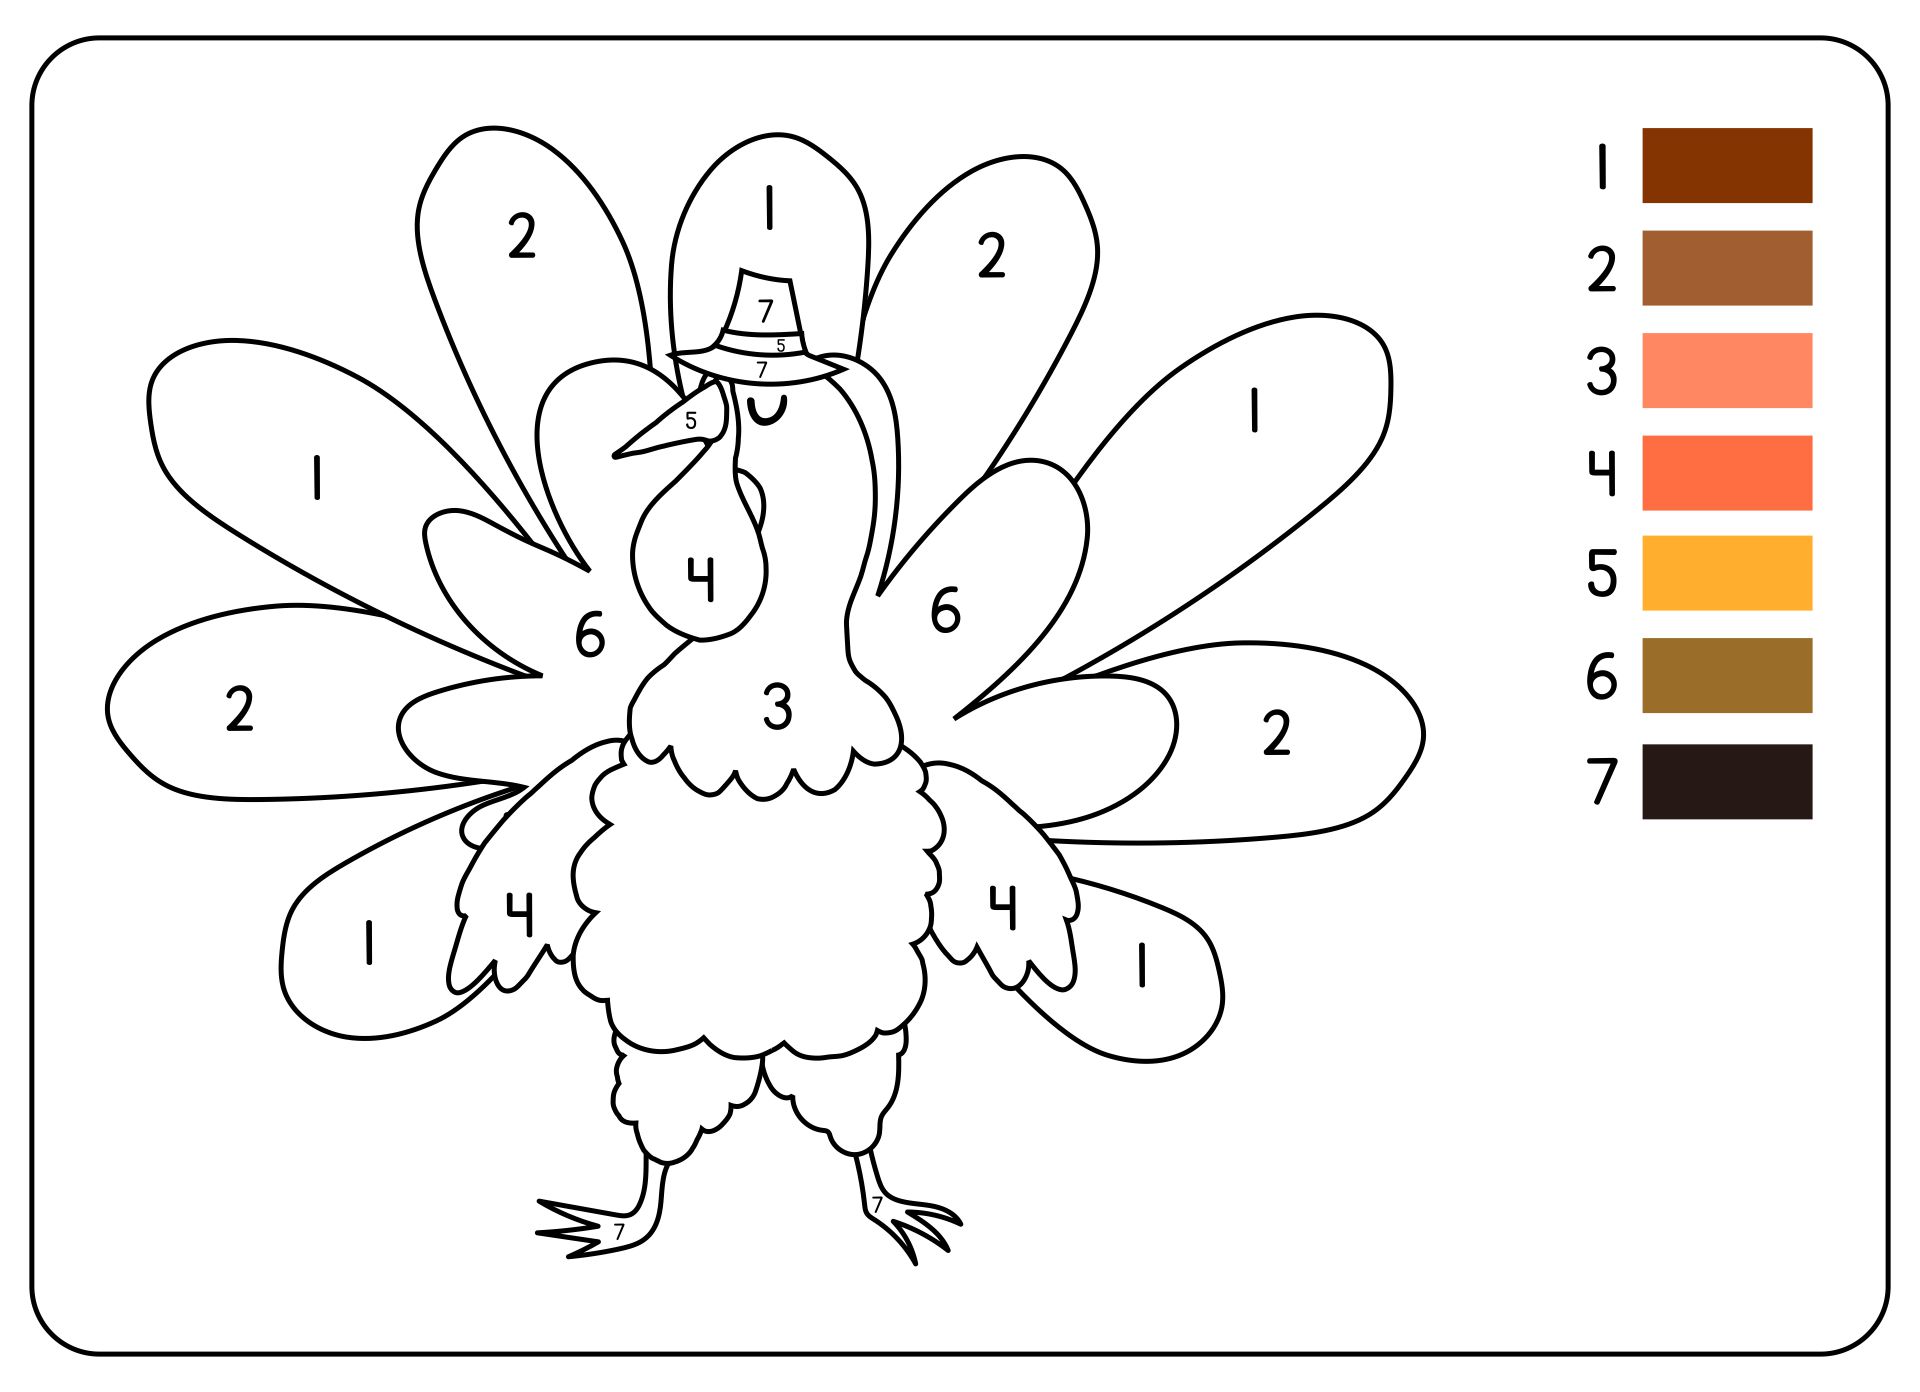 10 Best Printable Thanksgiving Color By Number Coloring Pages